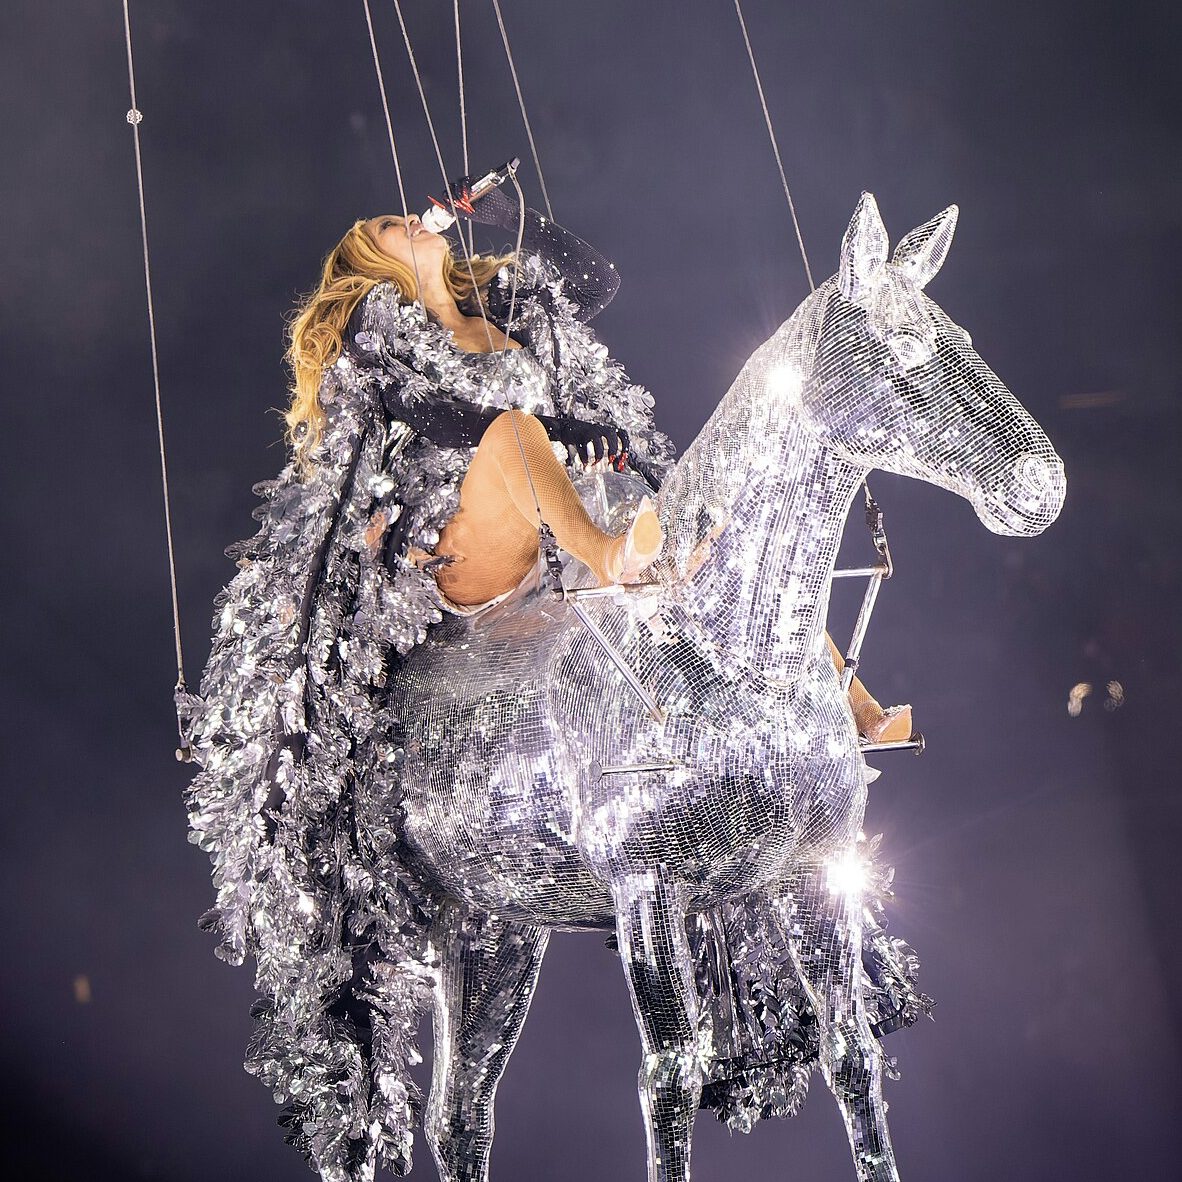 Beyonce floats above fans on her silver mirrored horse while singing to the crowd. She finished her tour off in Kansas City. (Ralph_PH)